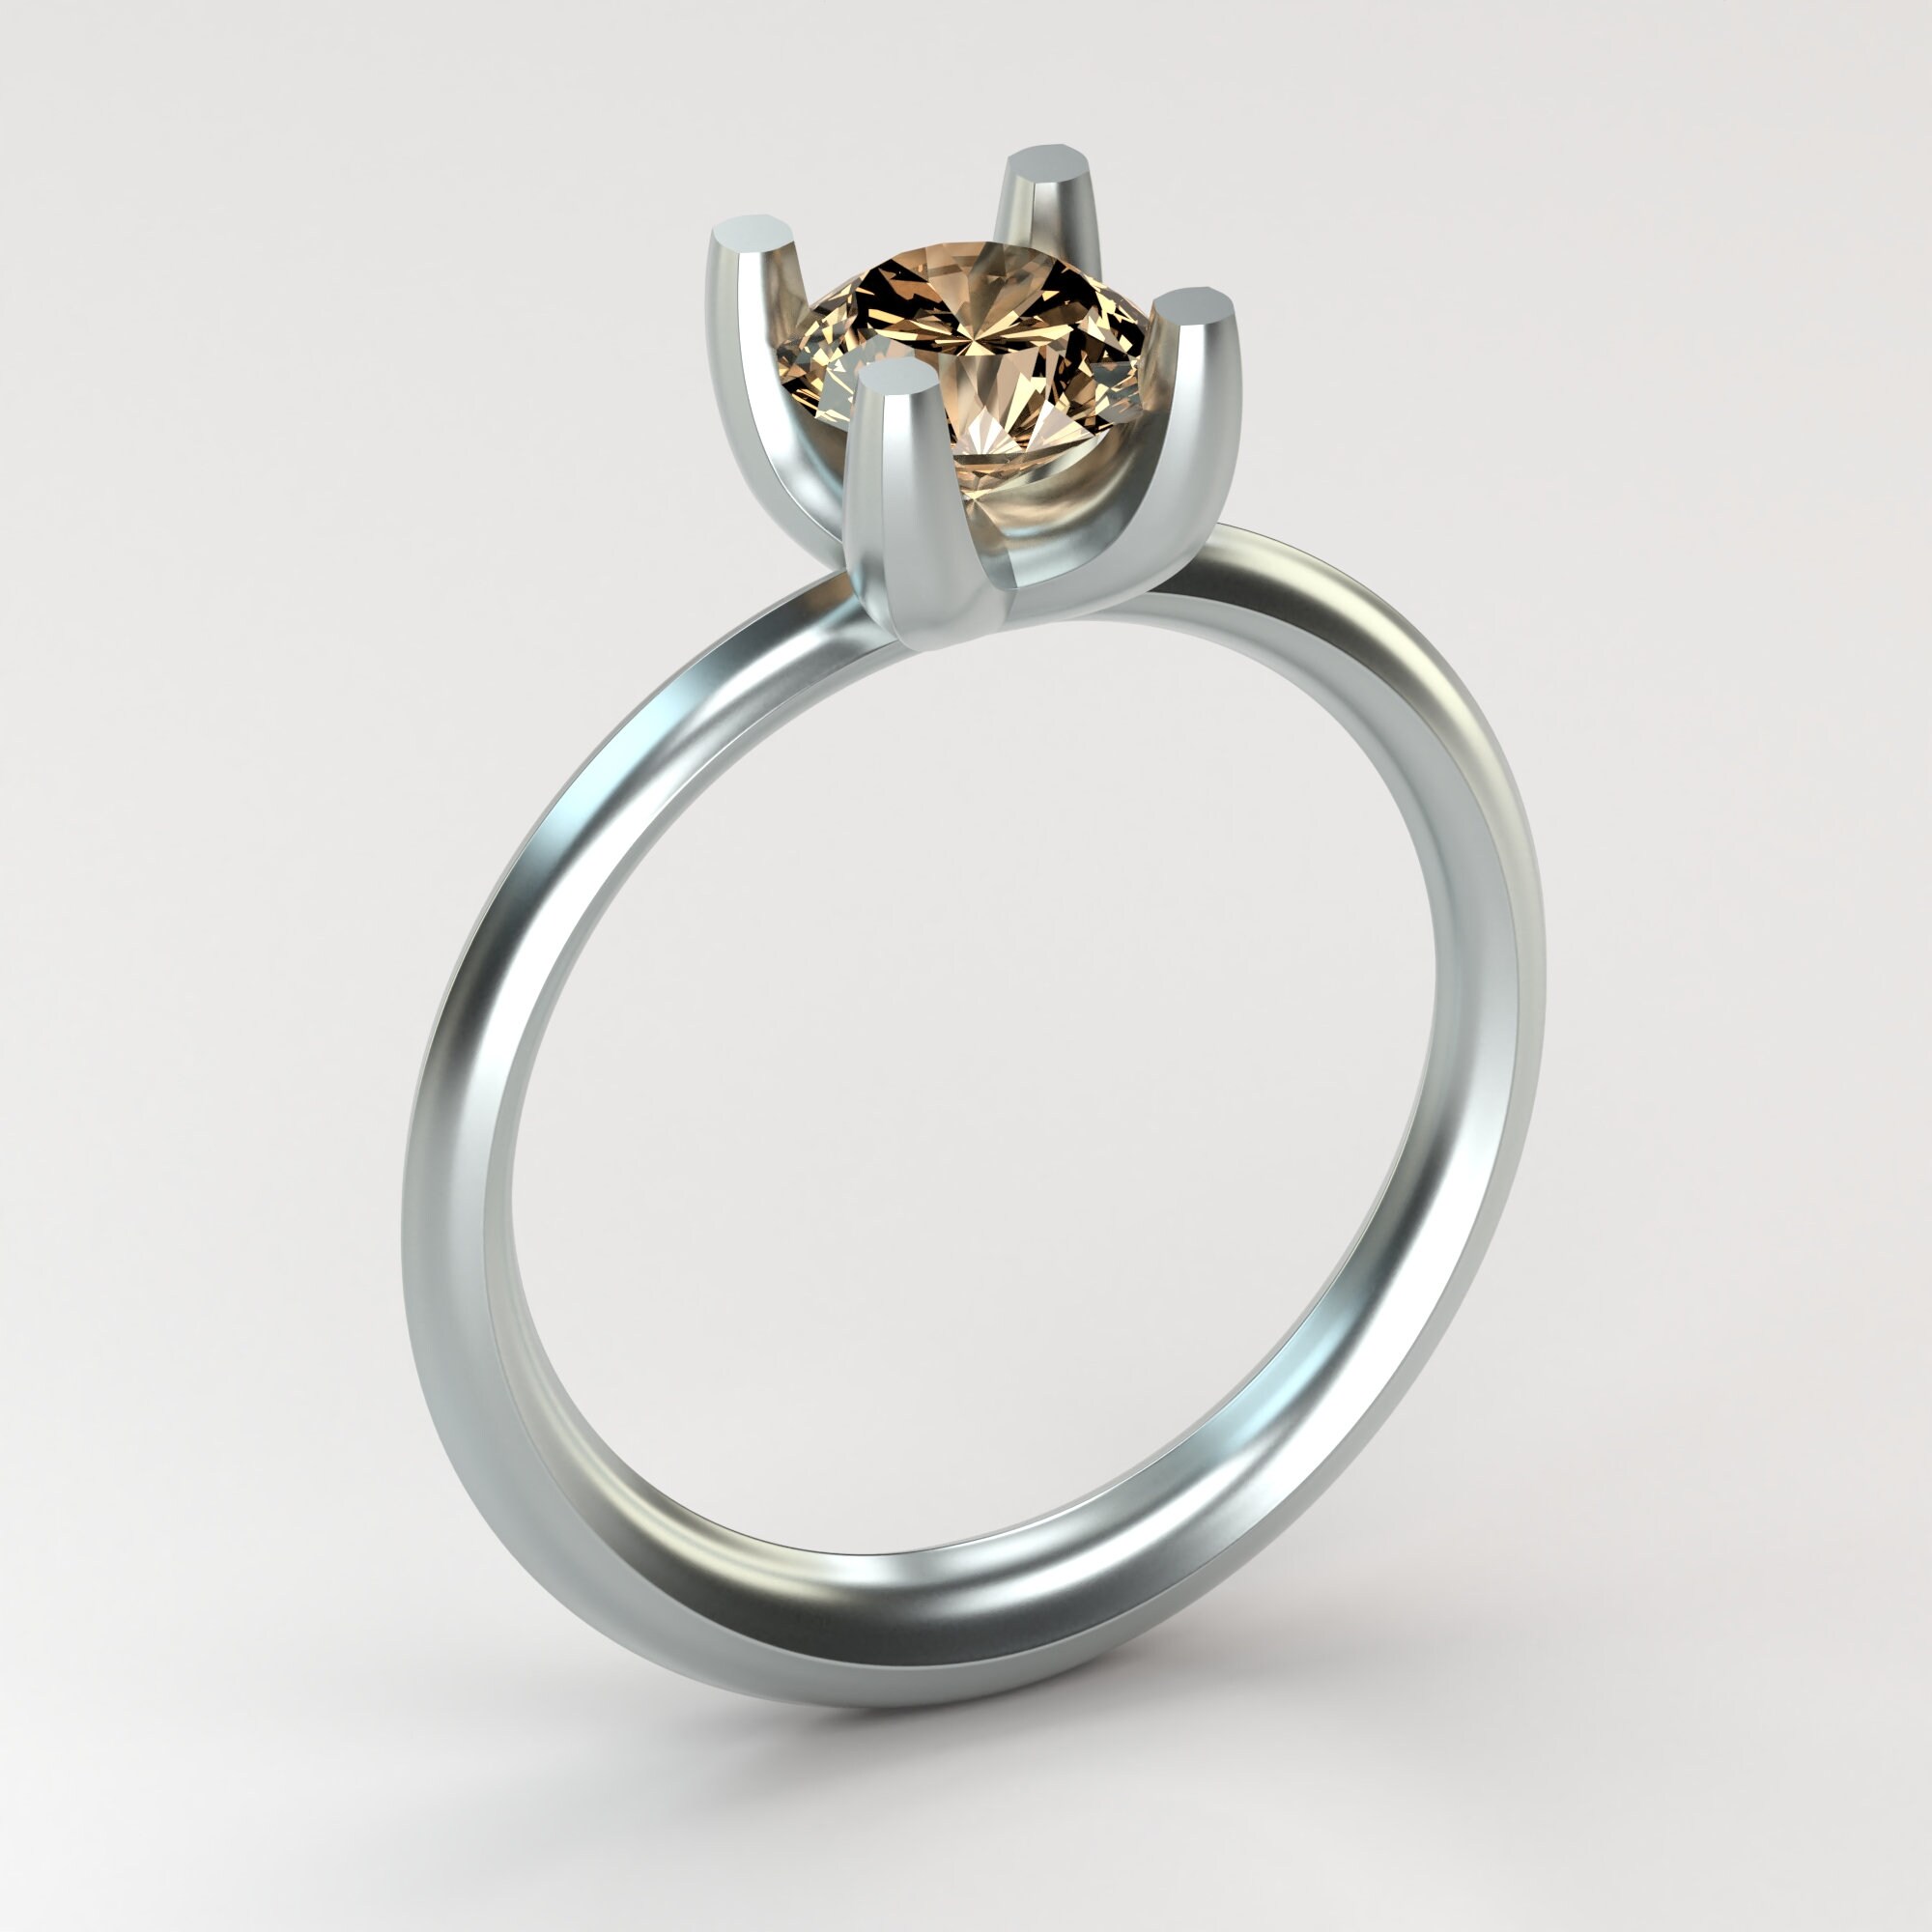 CC27-Engagement Ring Printed Wax. (SXQPDCH4N) by jewelry3dmodels